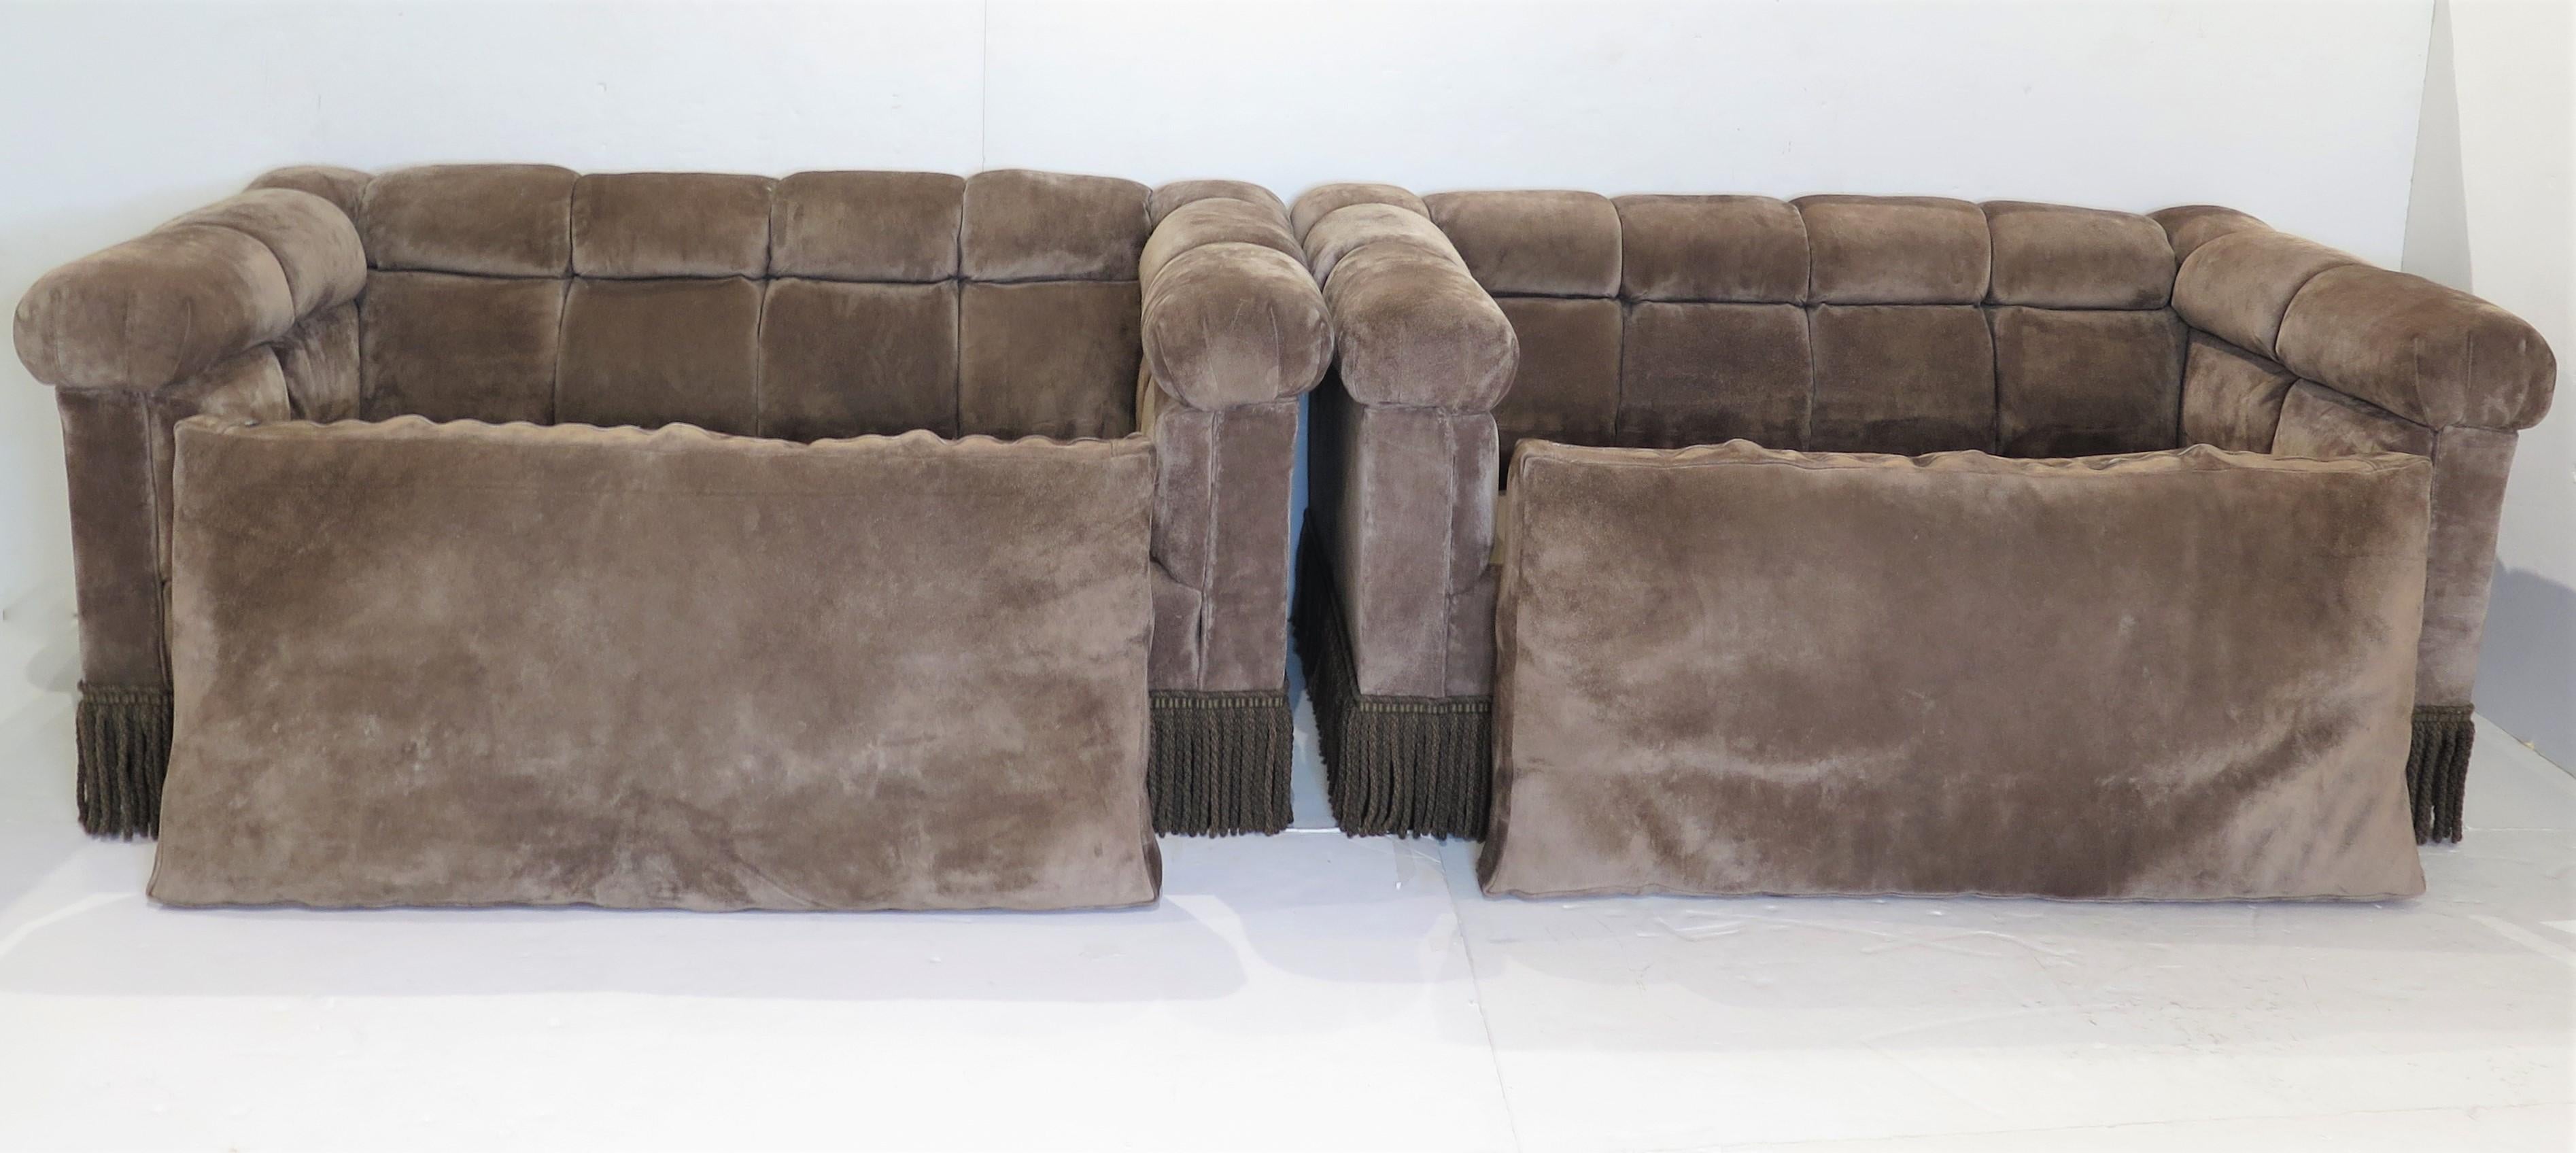 pair of mid-century modern Dunbar Chesterfield sofas with brown suede button tufted upholstery and bullion fringe, single seat cushion, early 1960s 

the sofas, originally low to the floor, were raised as their owner got older, the bullion fringe